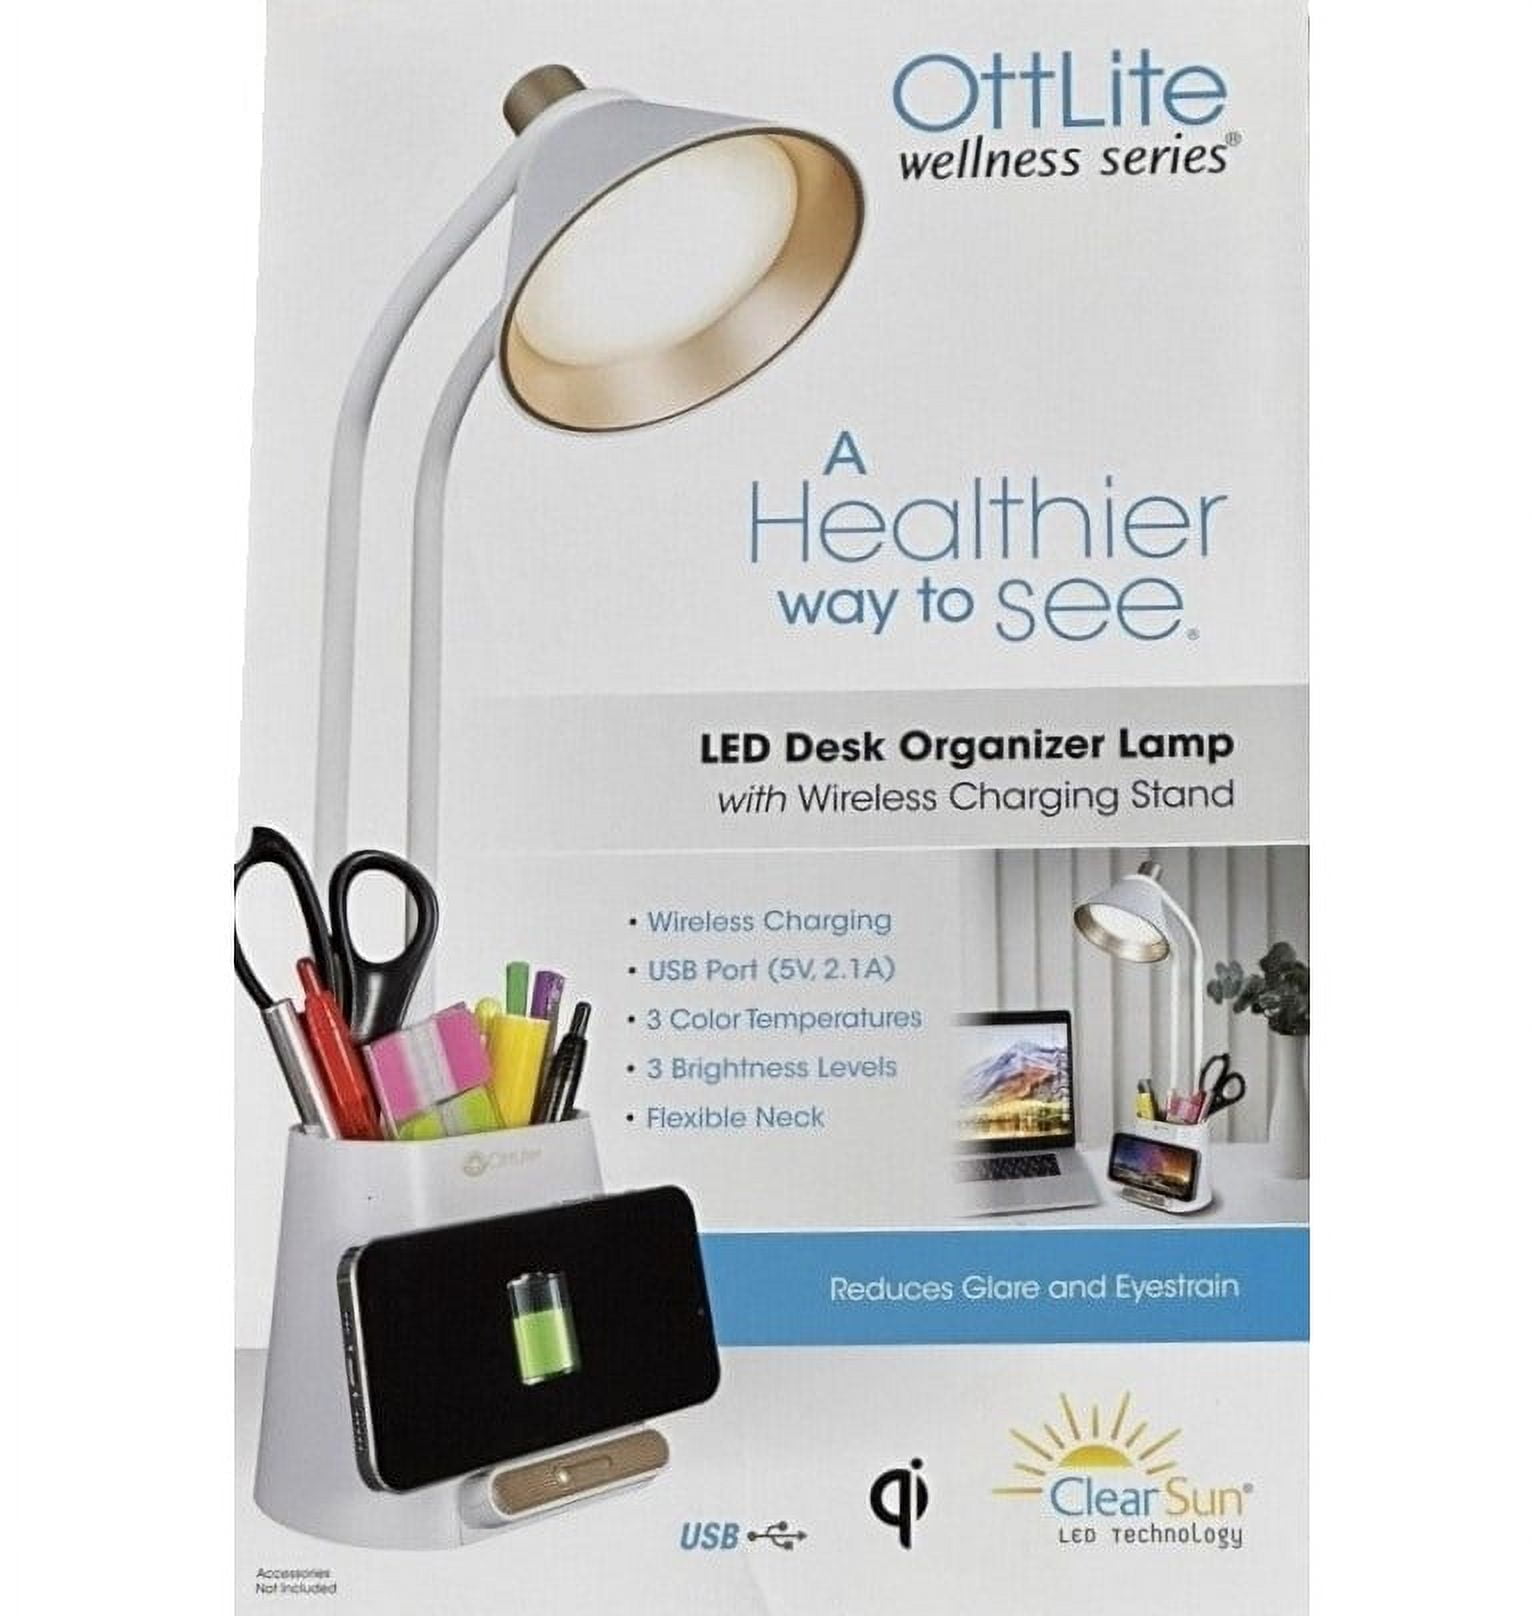 OttLite LED Desk Organizer Lamp with Wireless Charging Stand, White